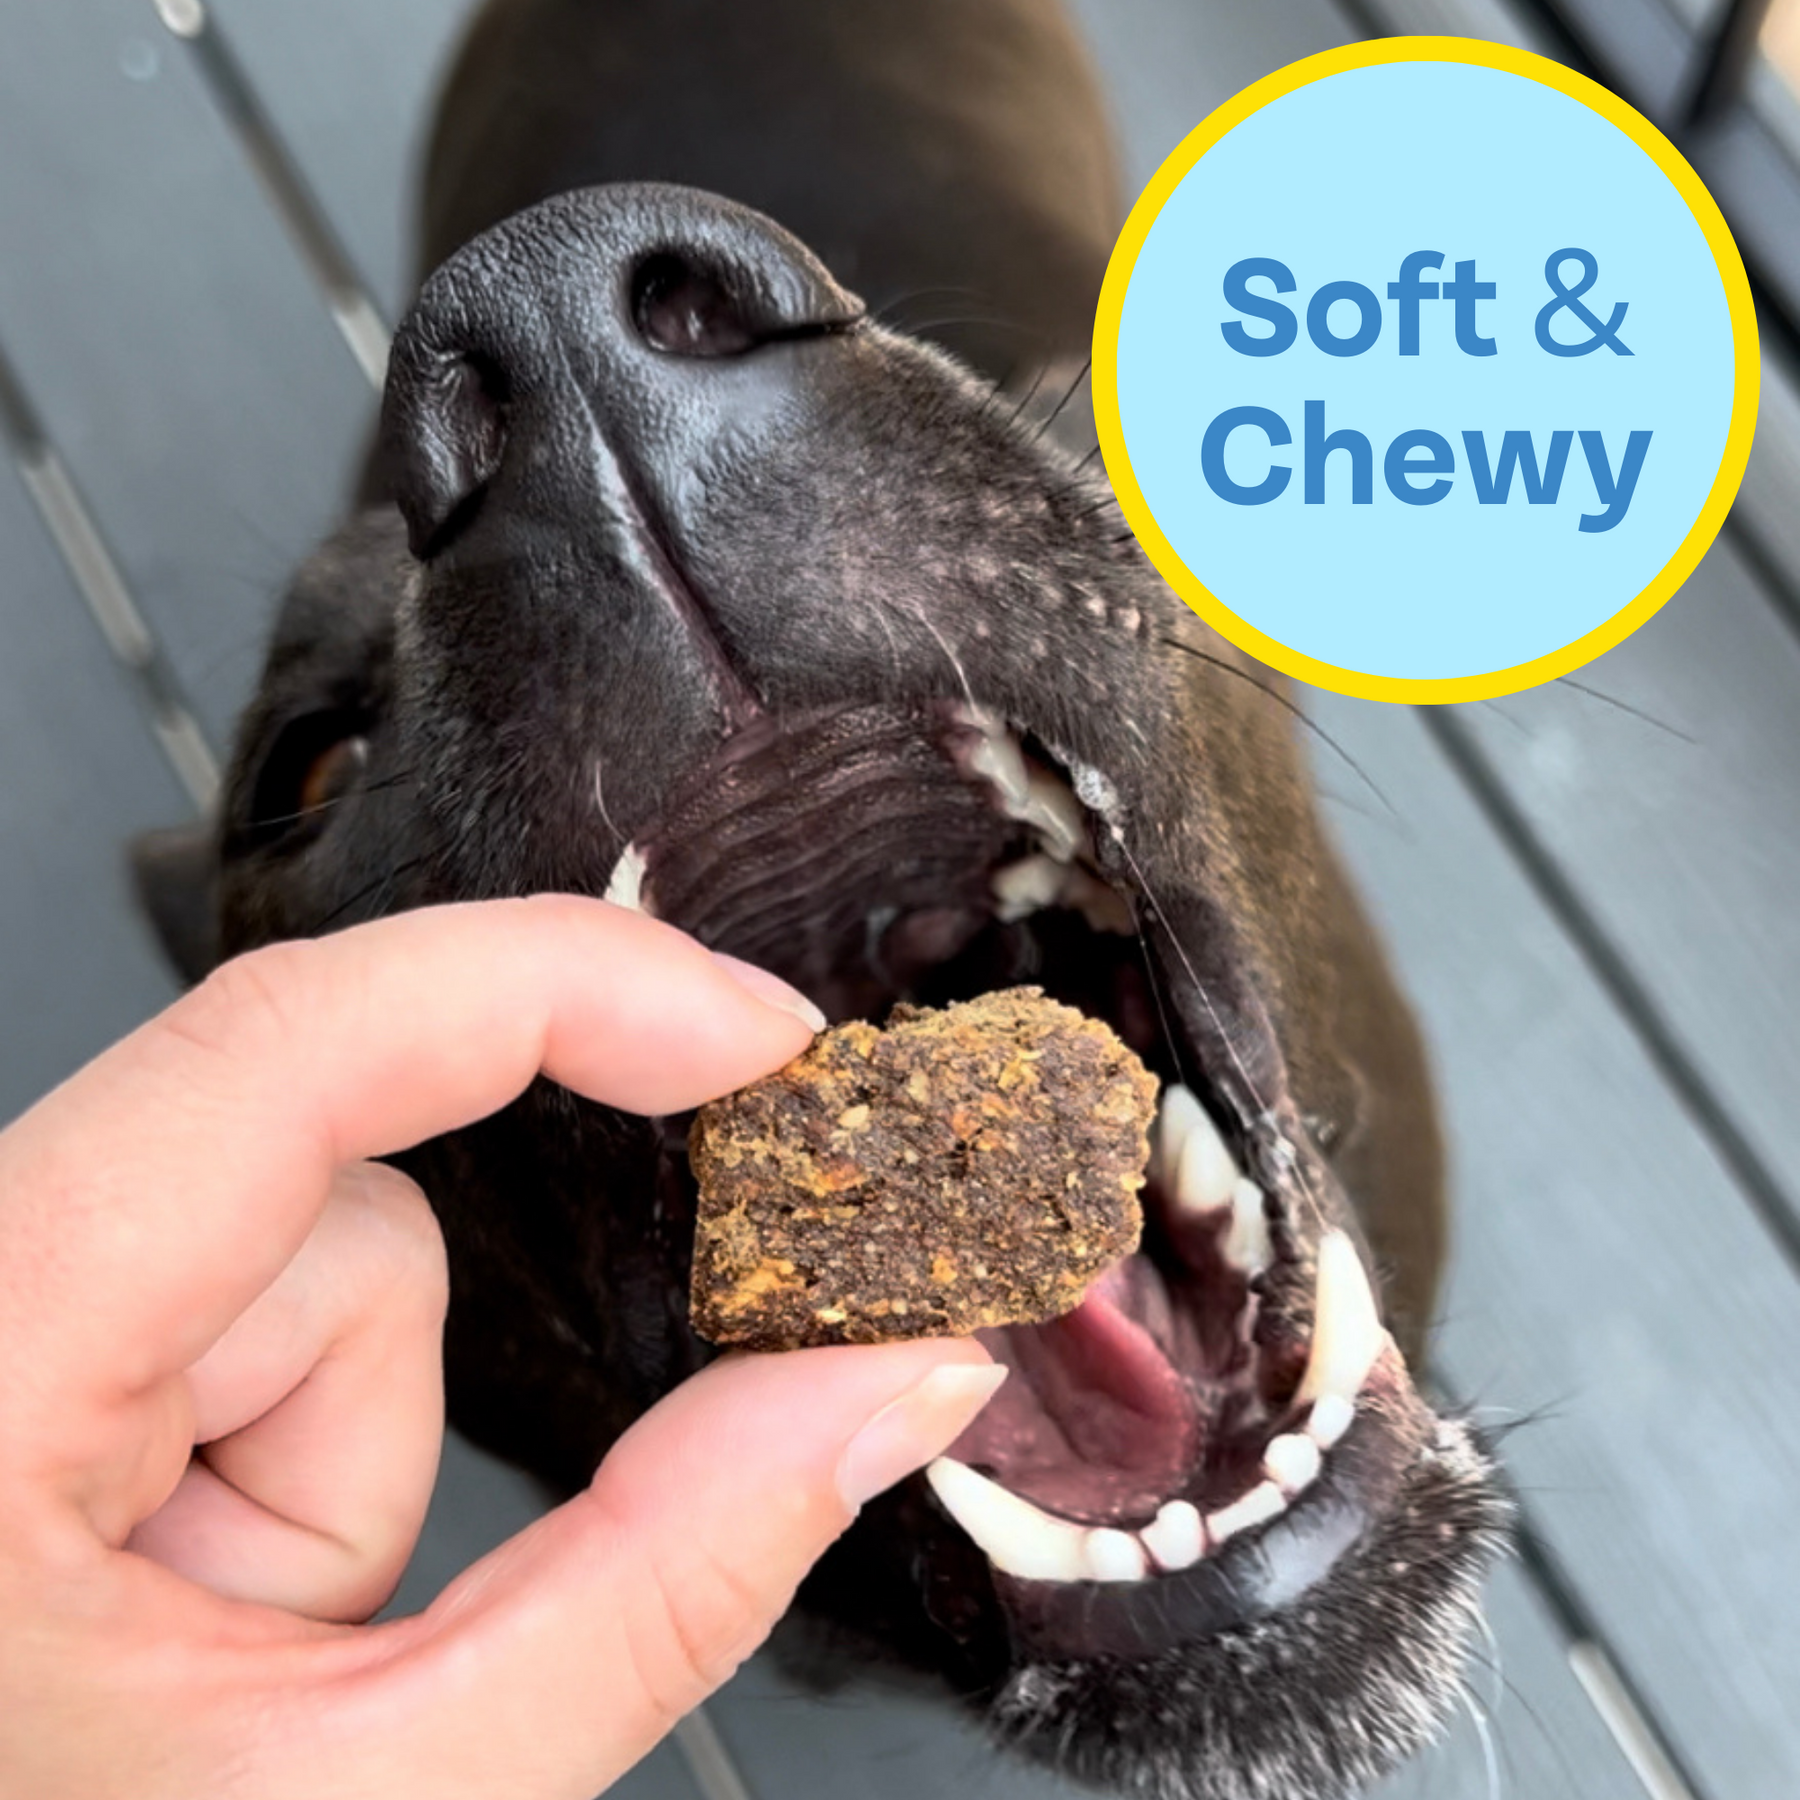 Close up of a dog about to take a bite of a dog jerky treat and it says soft and chewy.